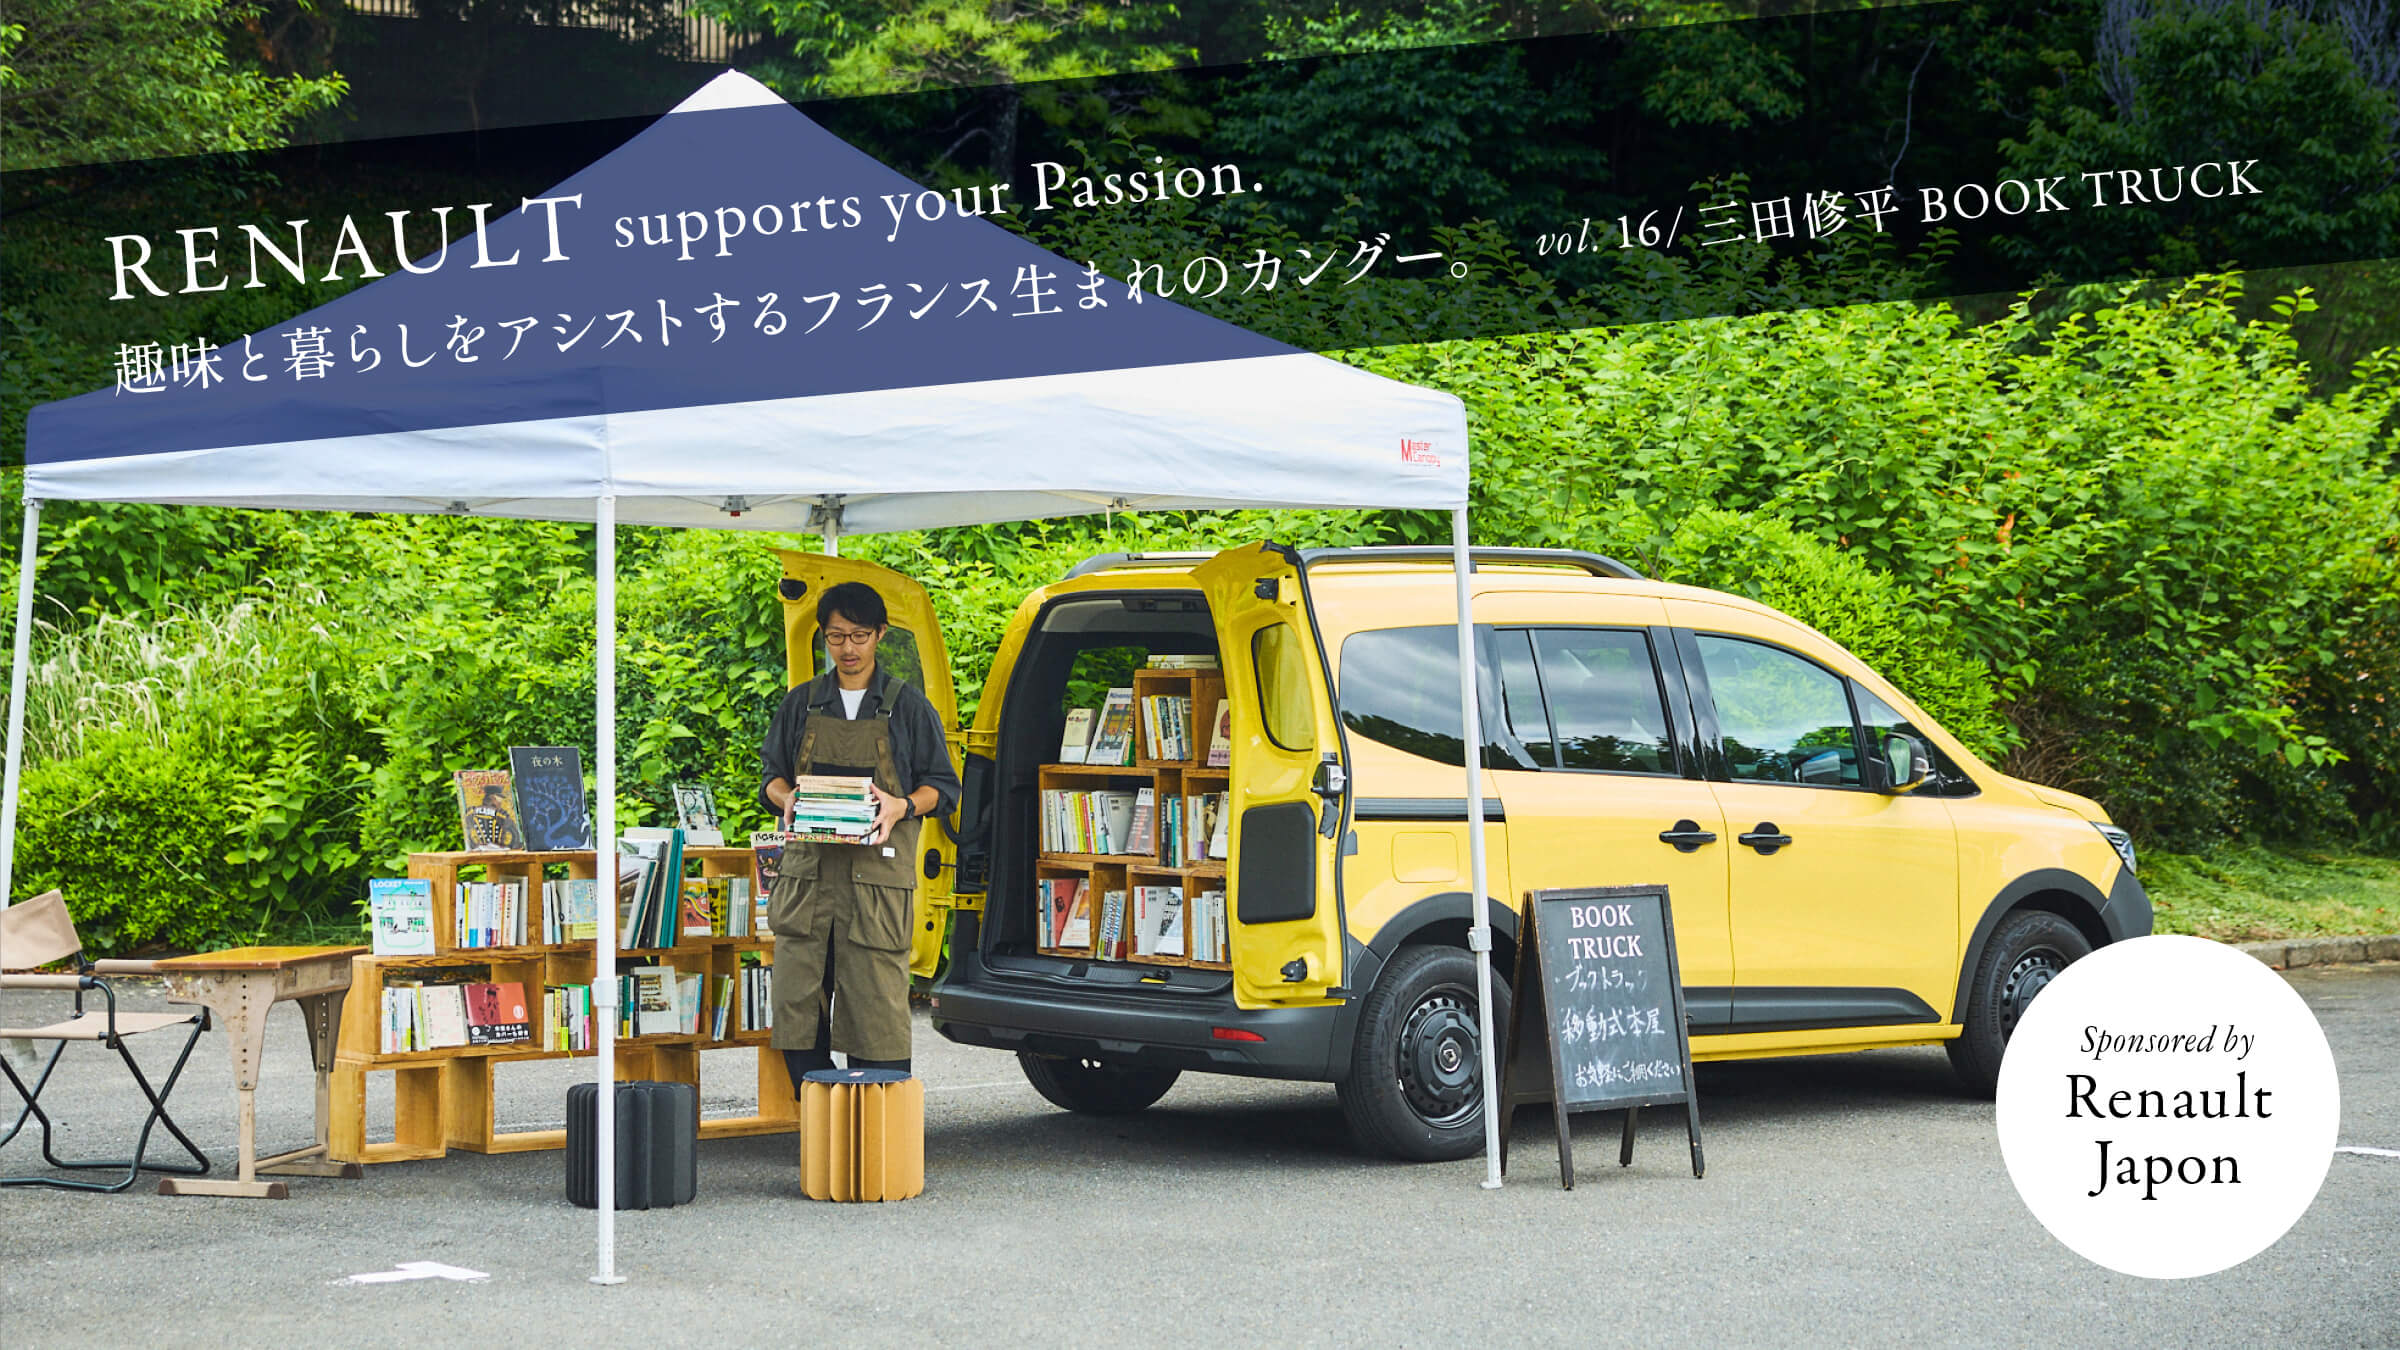 The French-born Kangoo assists people in their hobbies and lifestyles. Vol.16 / Shuhei Mita BOOK TRUCK